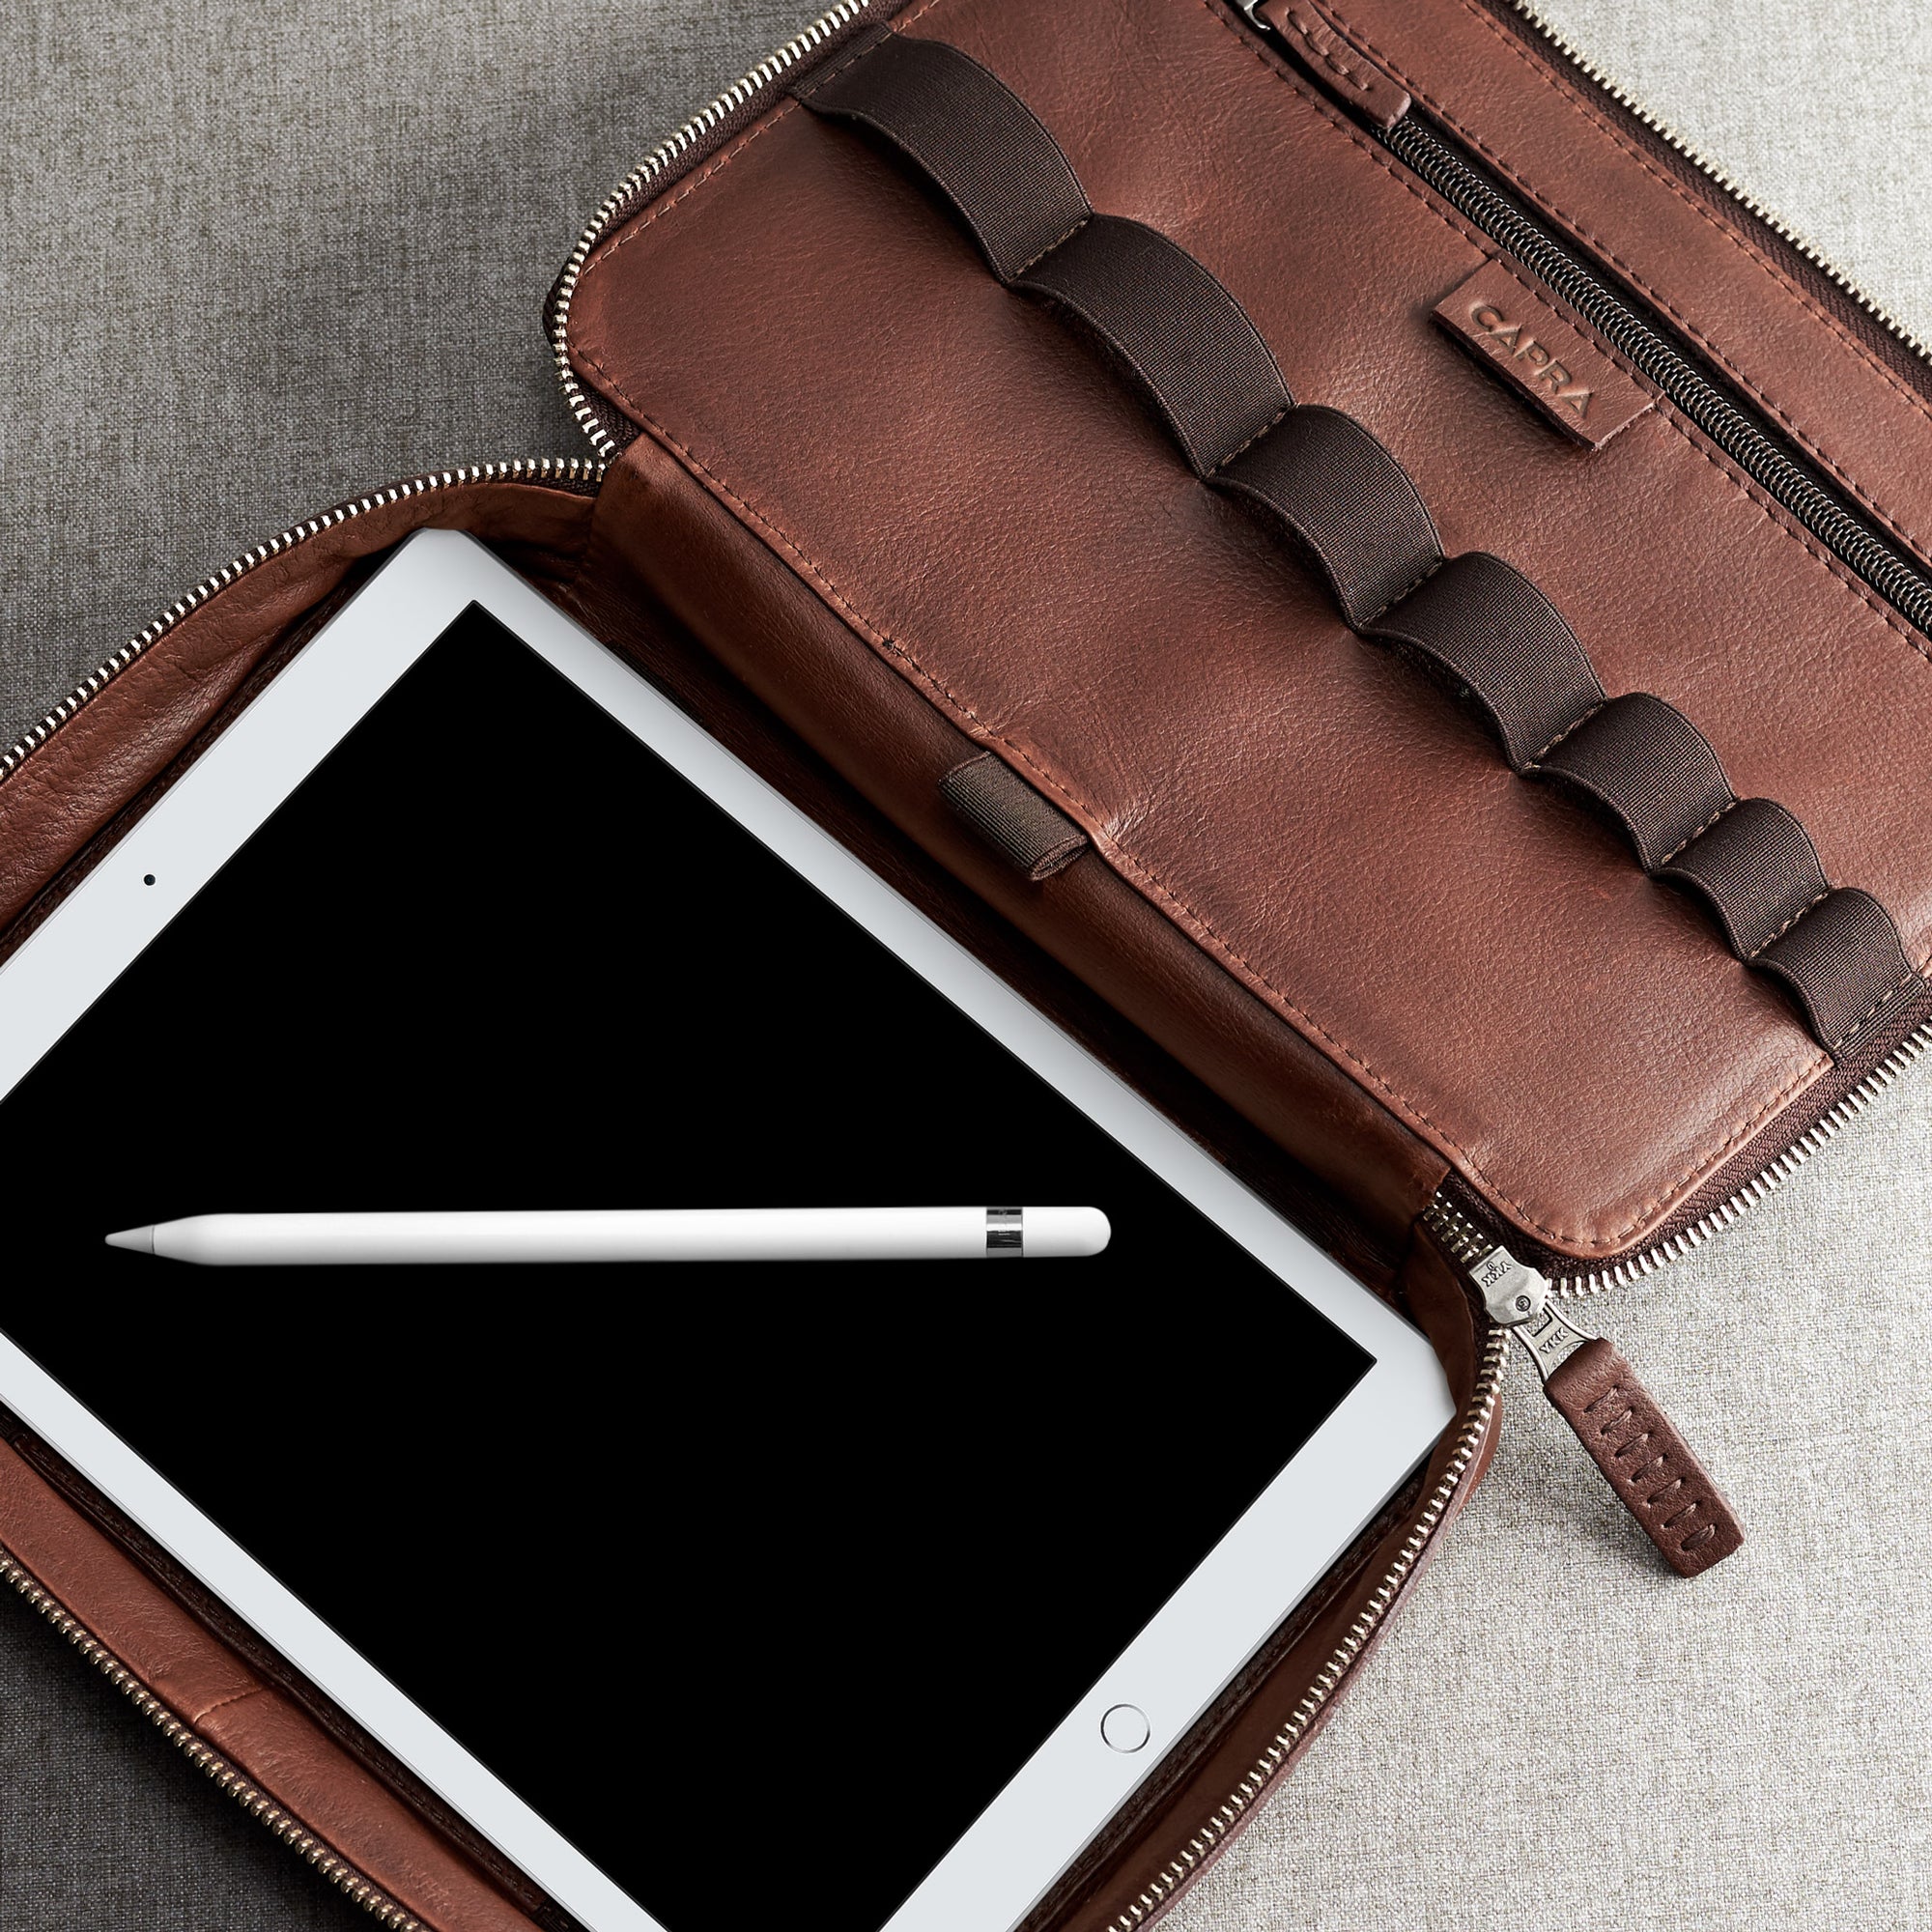 iPad Pro 11 pocket. Brown tech organizer for travel. Mens EDC bag by Capra Leather. Fits Apple iPad Pro with pencil.